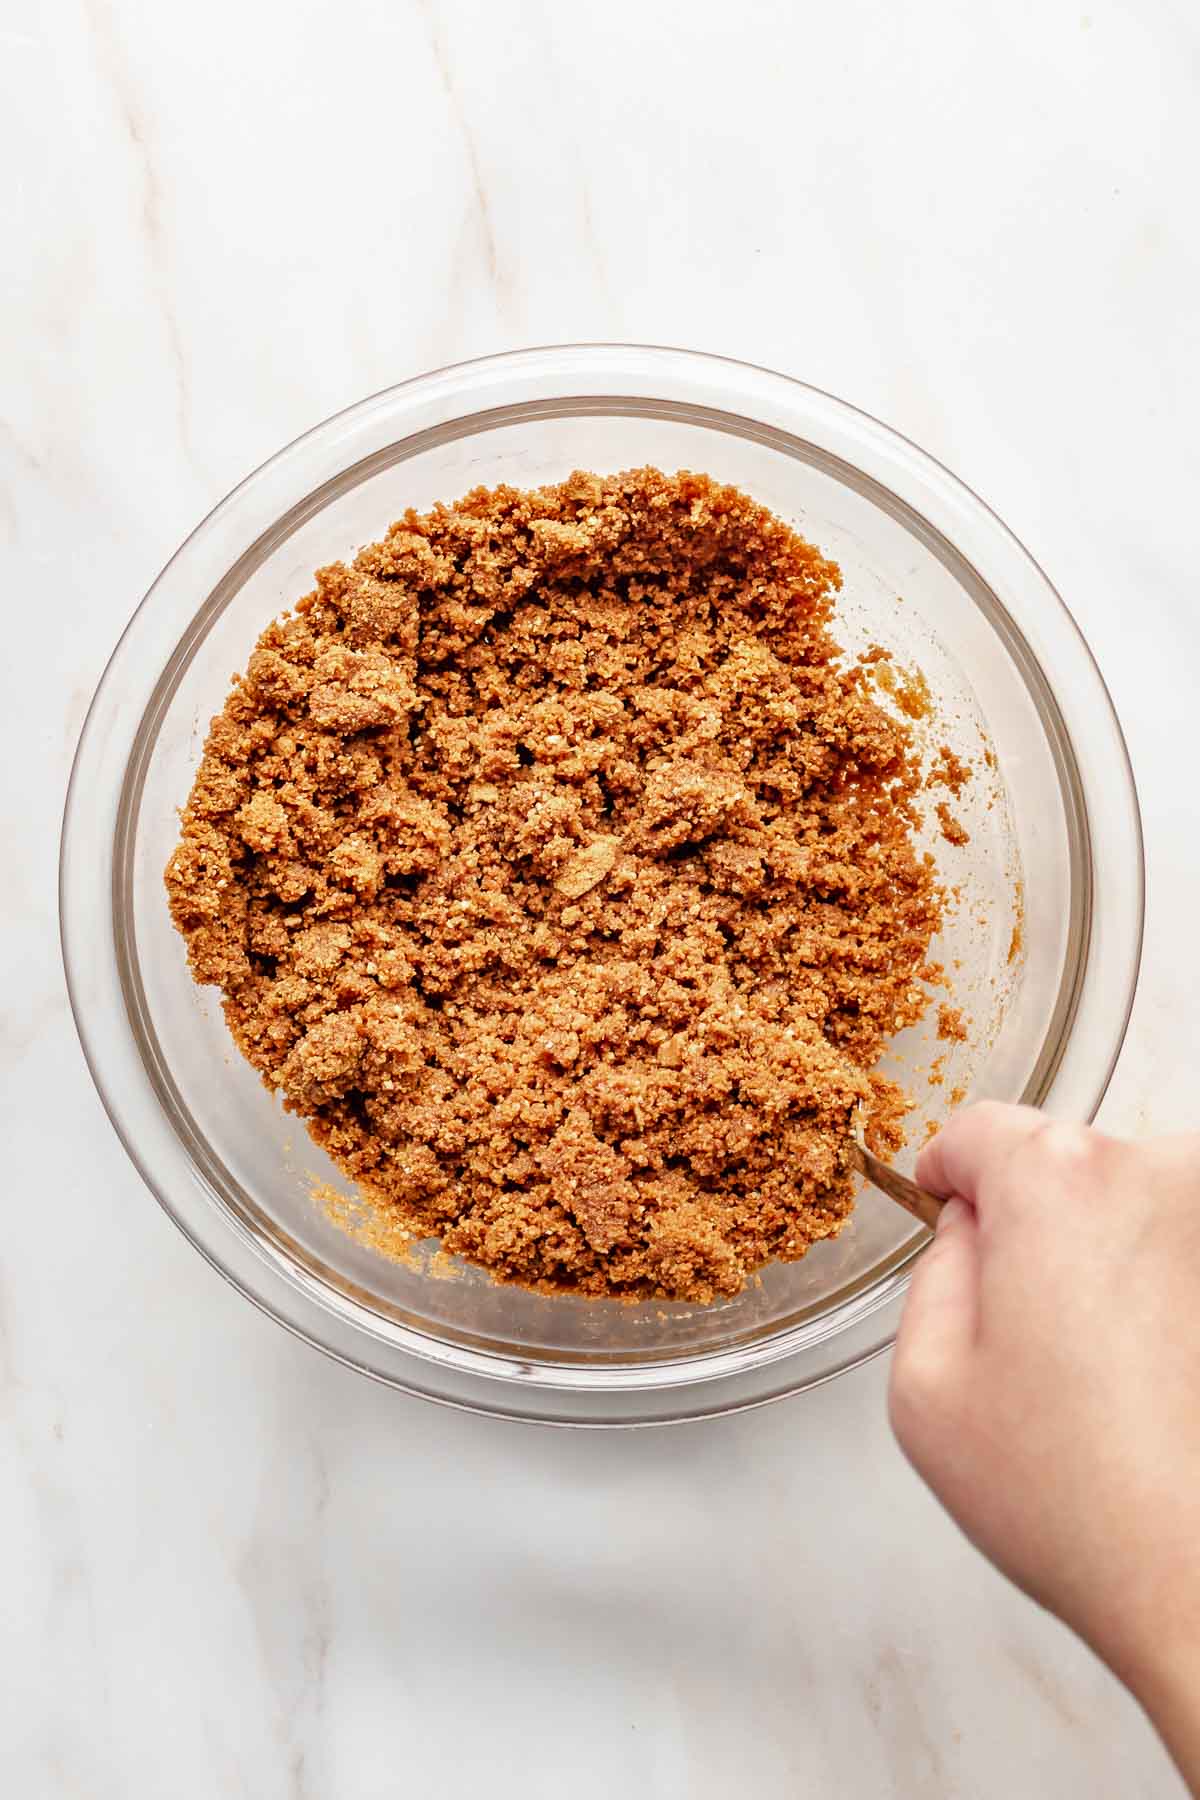 A hand mixes Biscoff cookie crumbs in a bowl.